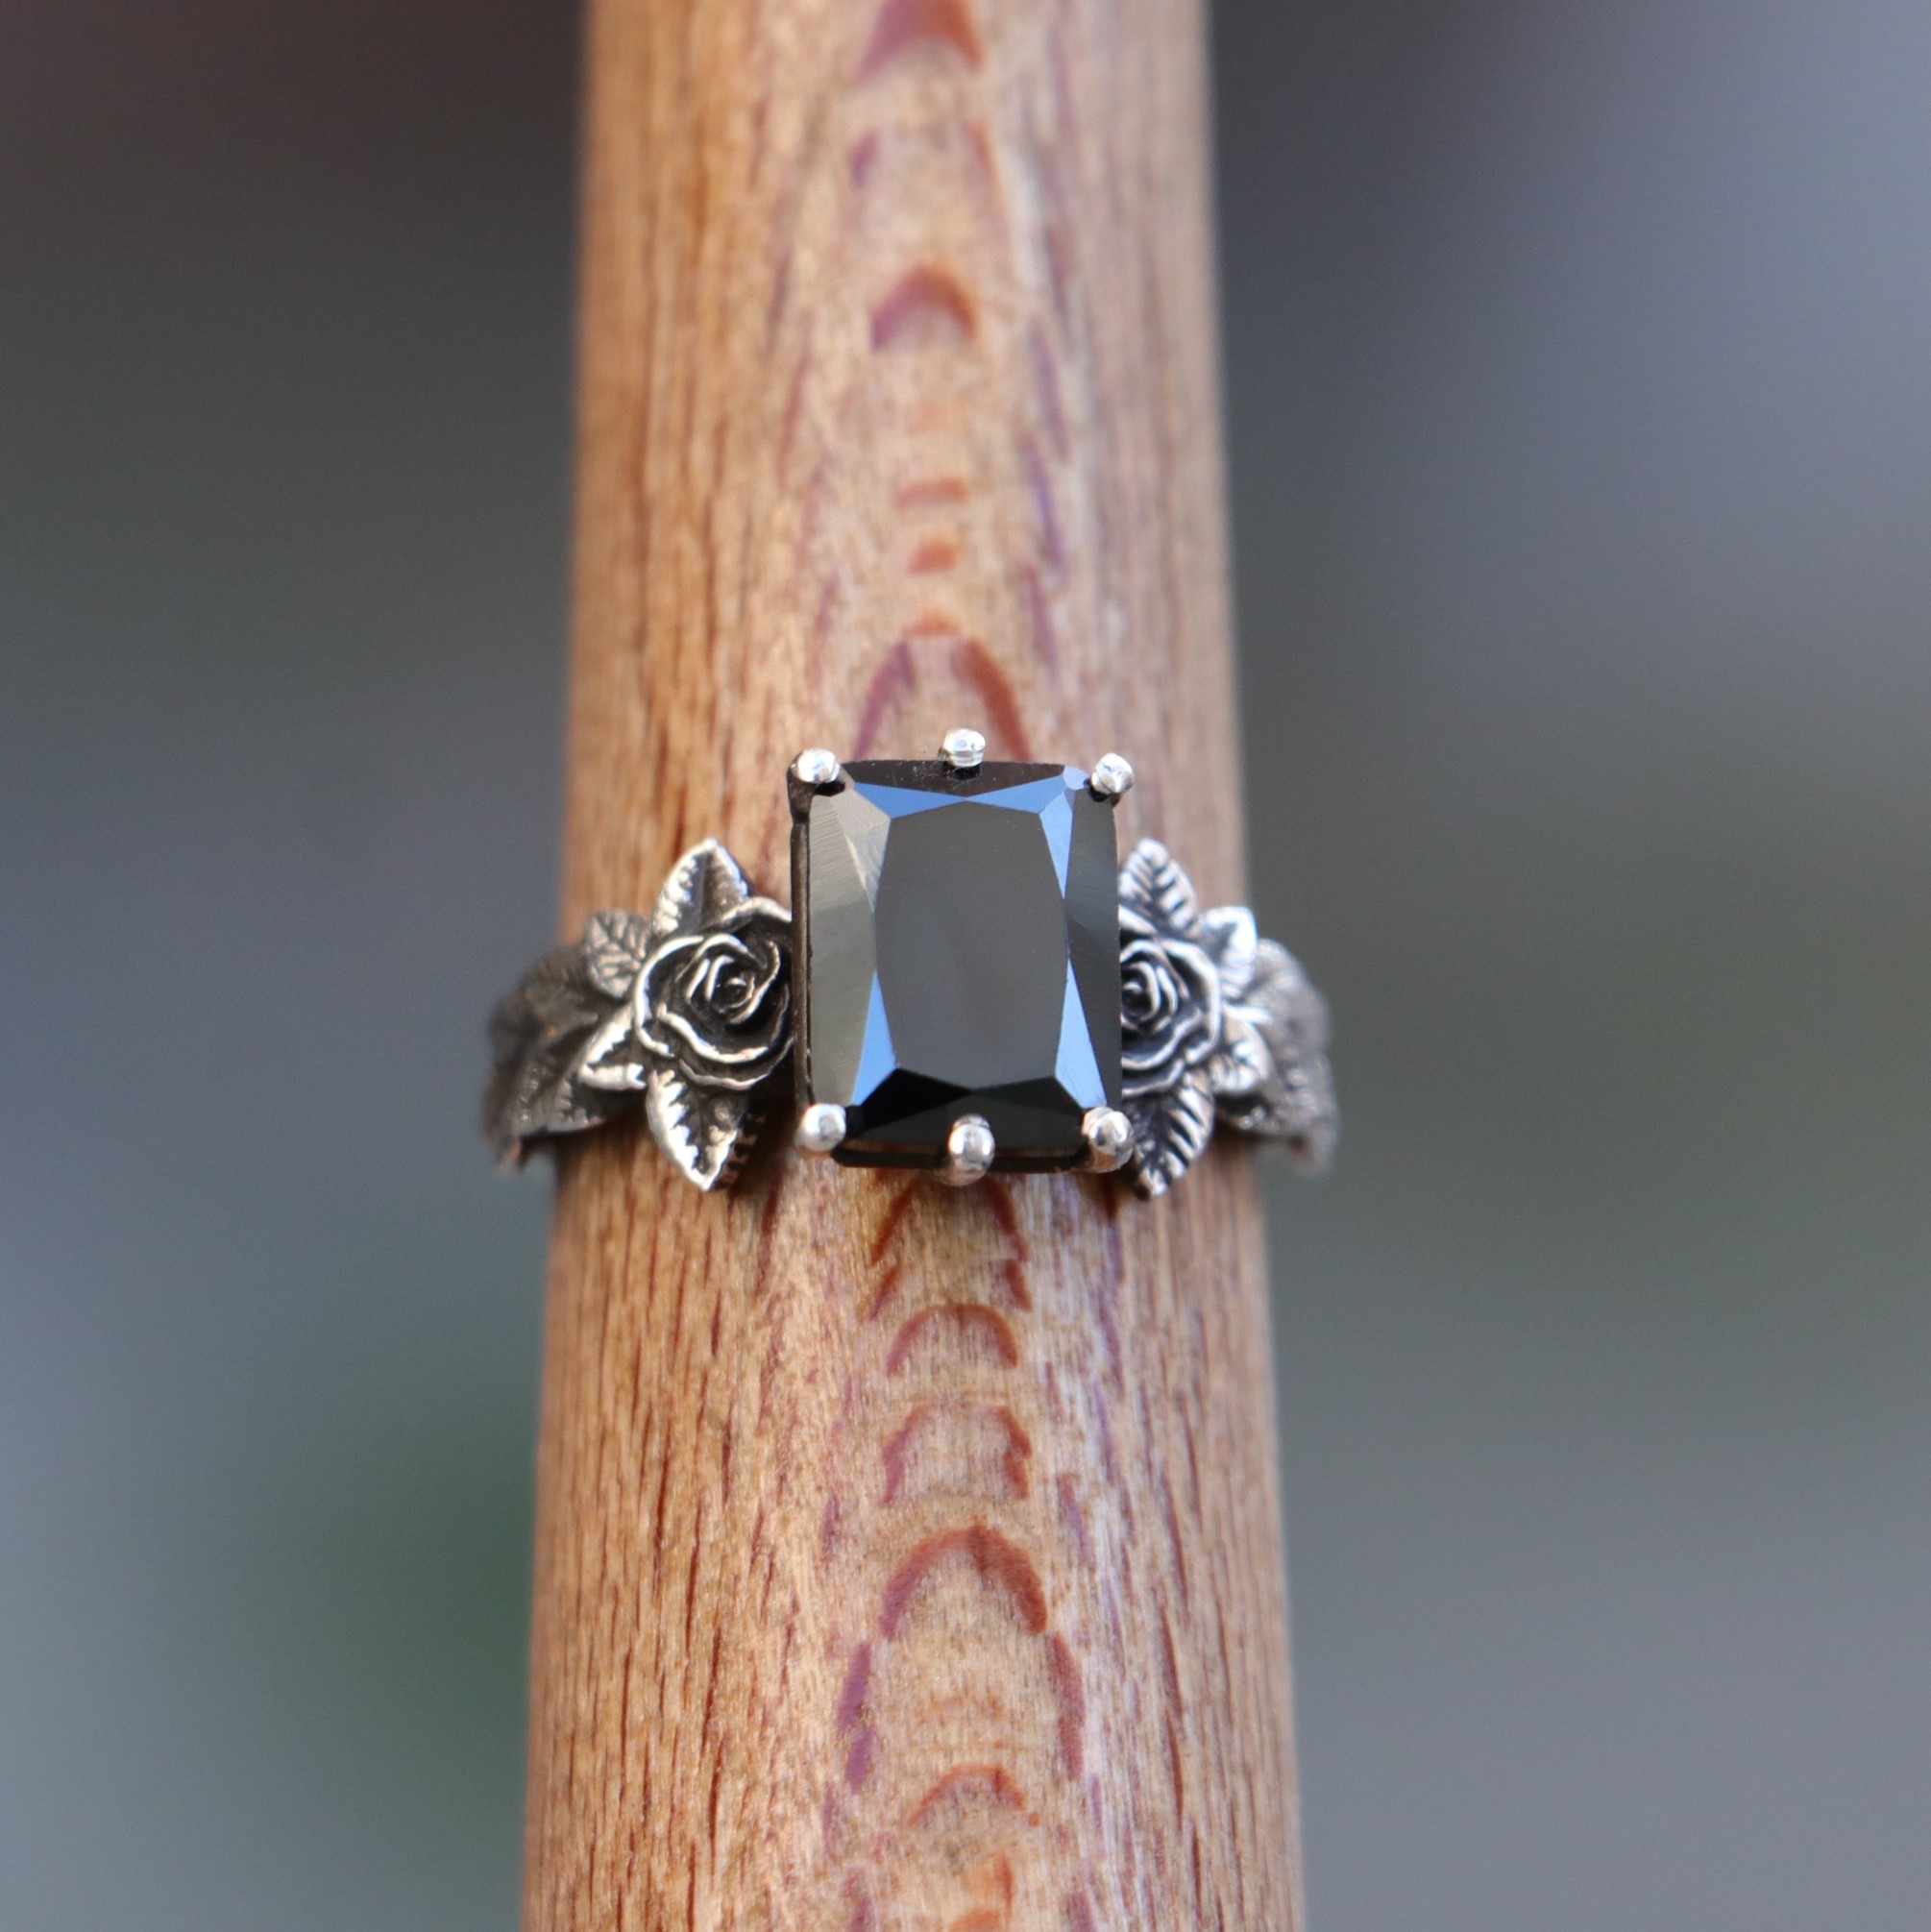 Emerald Cut Onyx and Leaves 925 Sterling Silver Ring